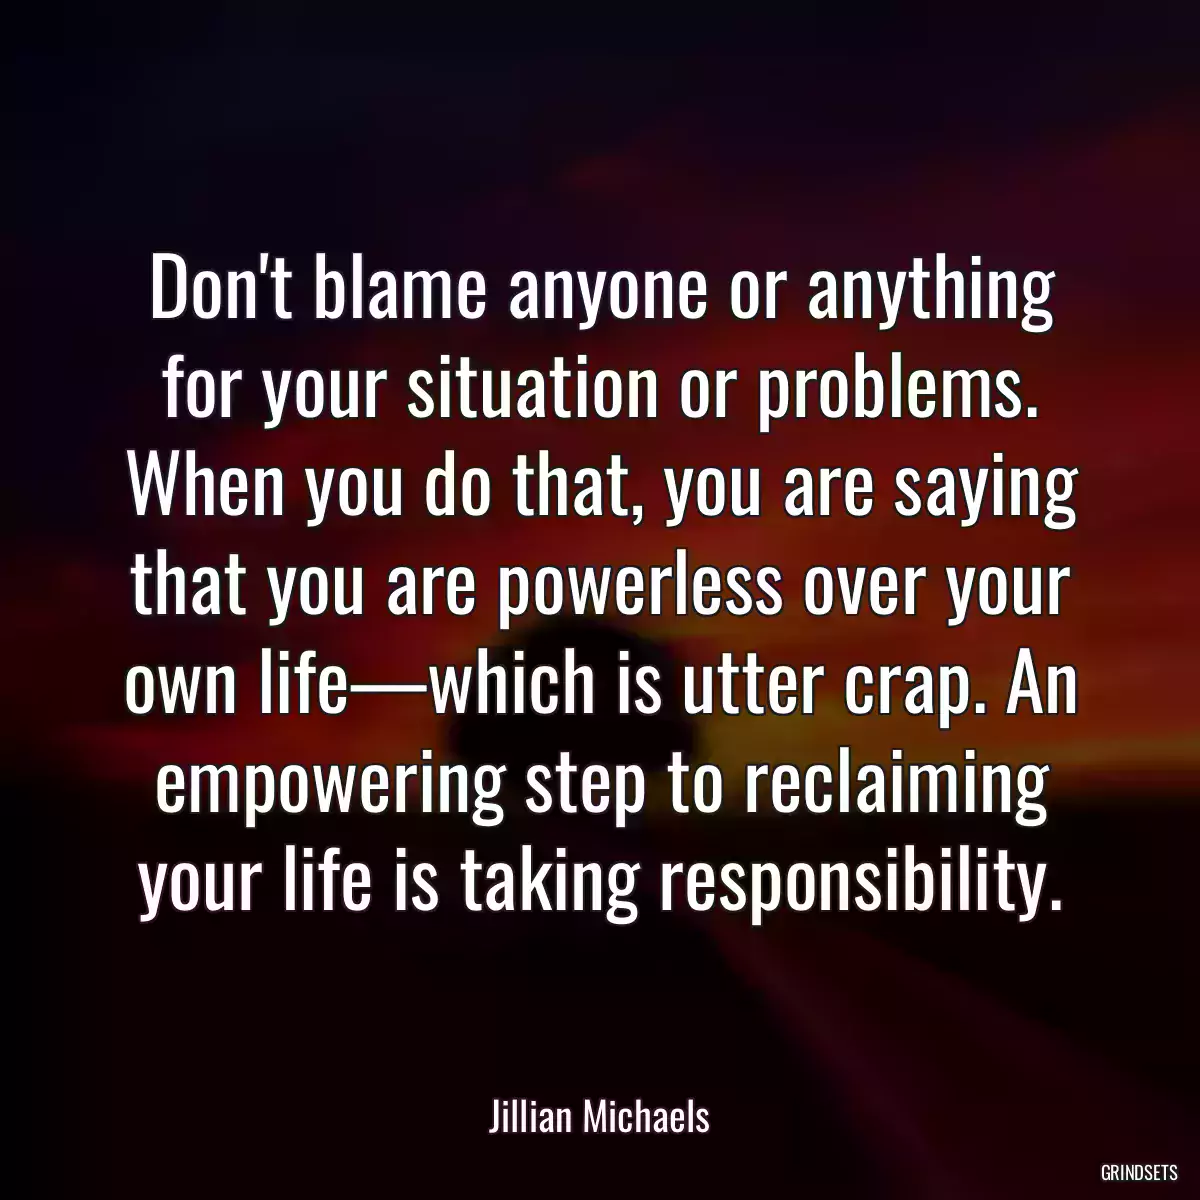 Don\'t blame anyone or anything for your situation or problems. When you do that, you are saying that you are powerless over your own life—which is utter crap. An empowering step to reclaiming your life is taking responsibility.